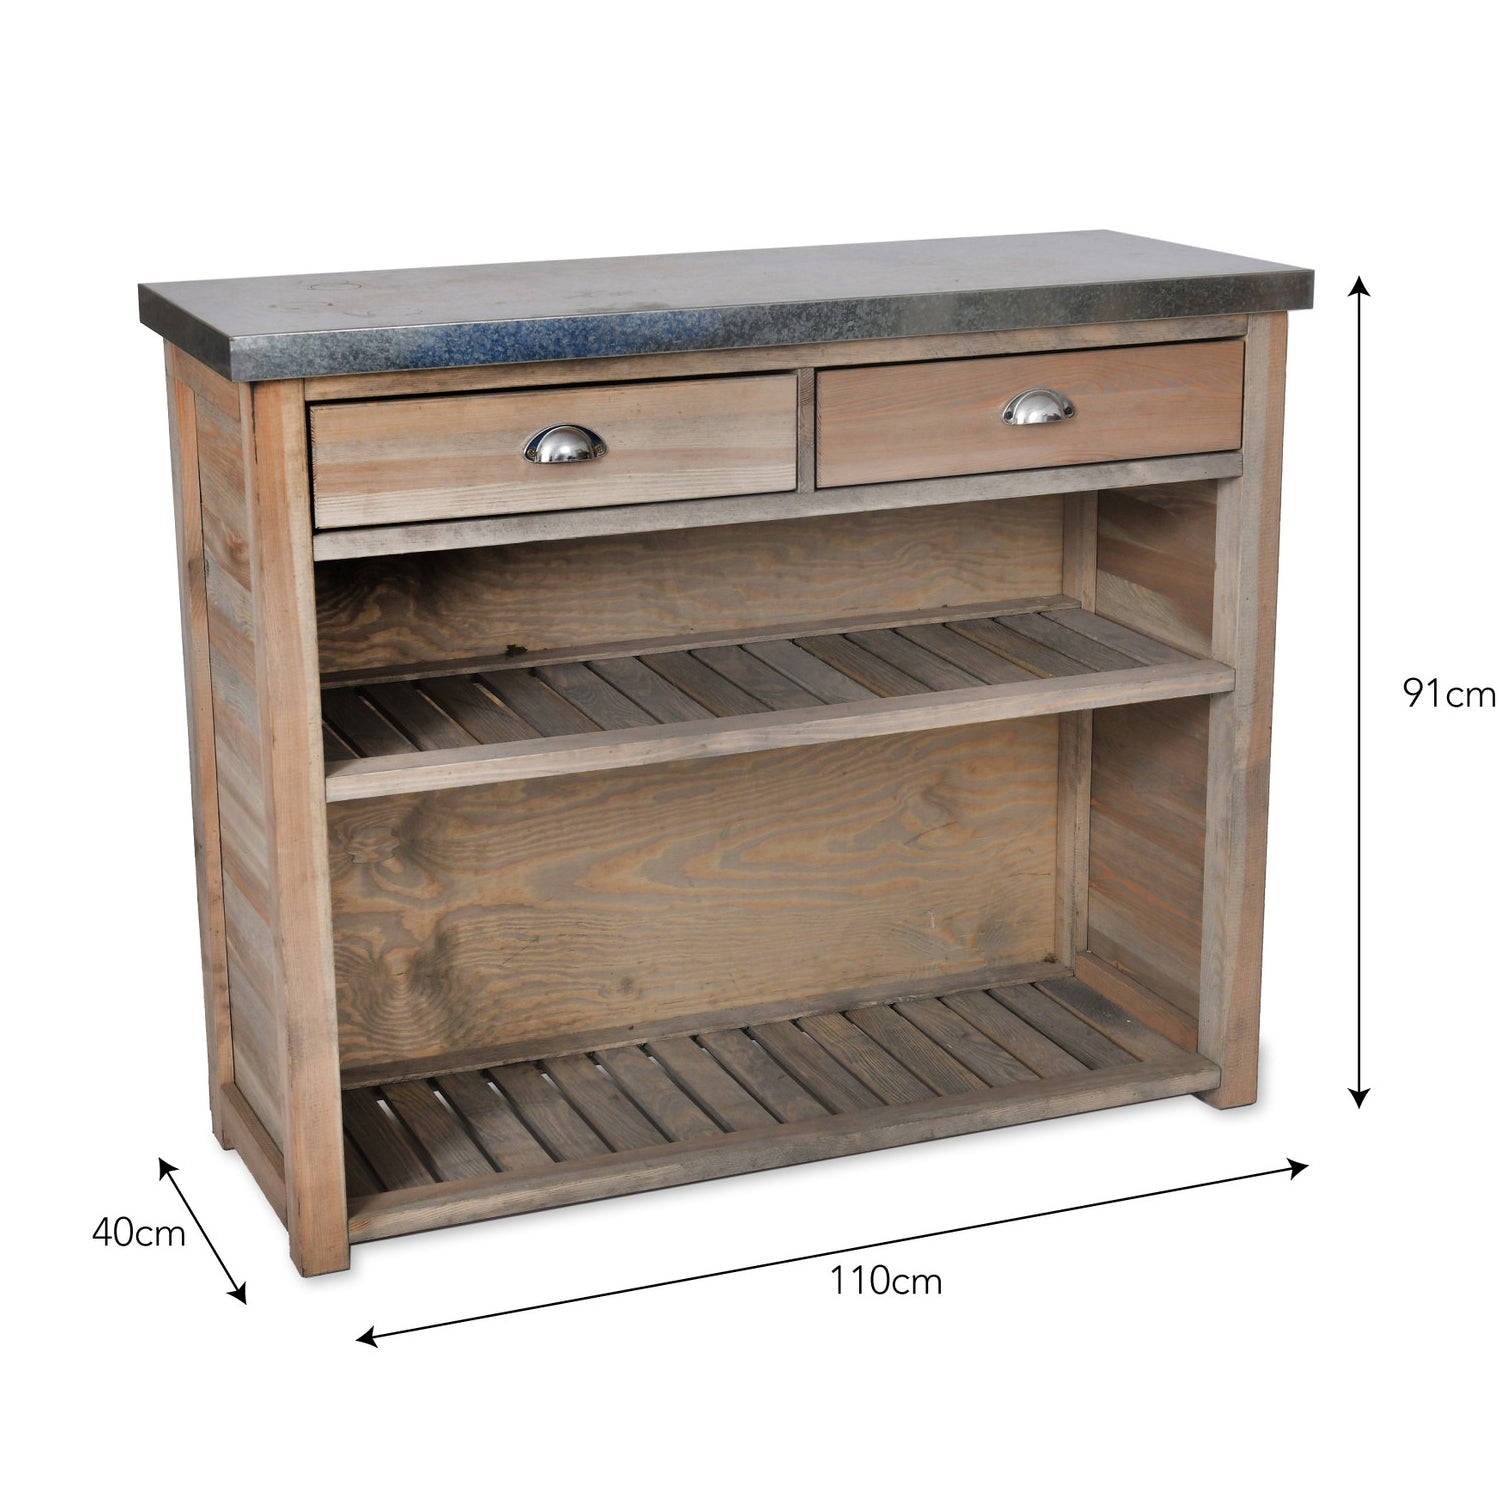 Aldsworth Bootroom Unit in Spruce by Garden Trading